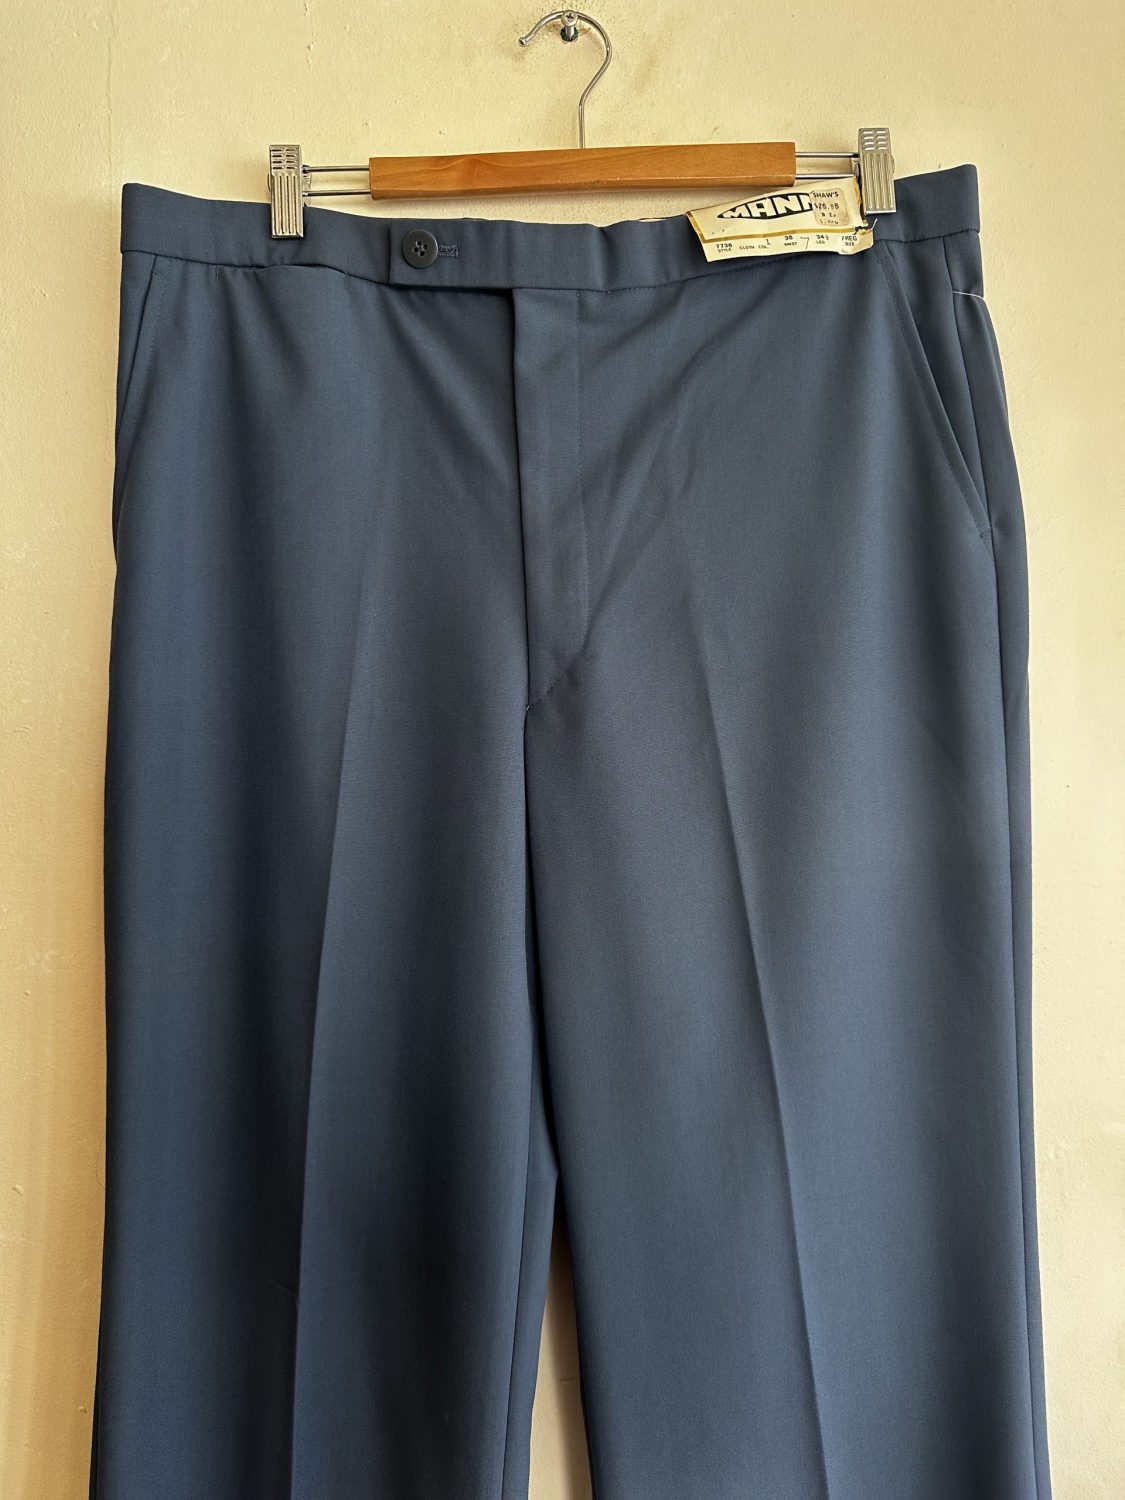 VINTAGE DEADSTOCK 70s 'MANN' BLUE FLARED MENS PANTS 38 INCH | Chaos ...